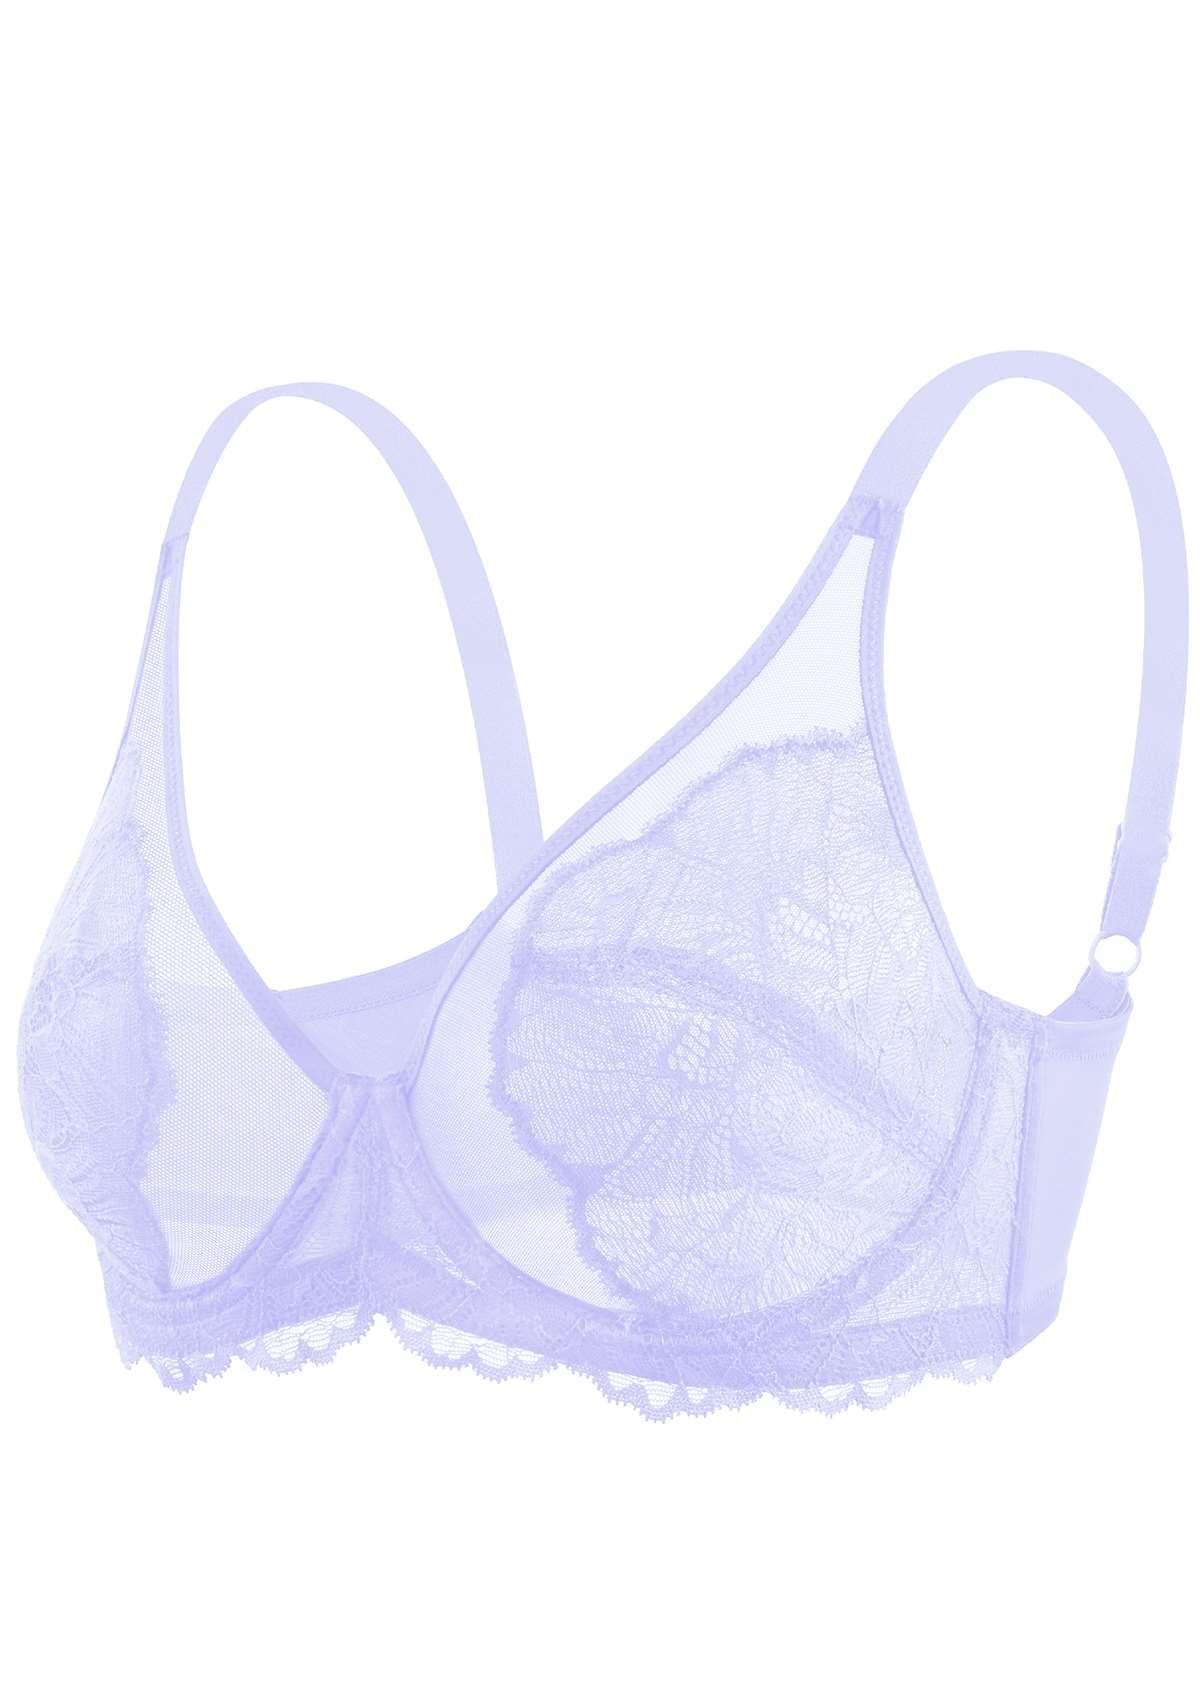 HSIA Blossom Transparent Lace Bra: Plus Size Wired Back Smoothing Bra - Light Purple / 38 / H